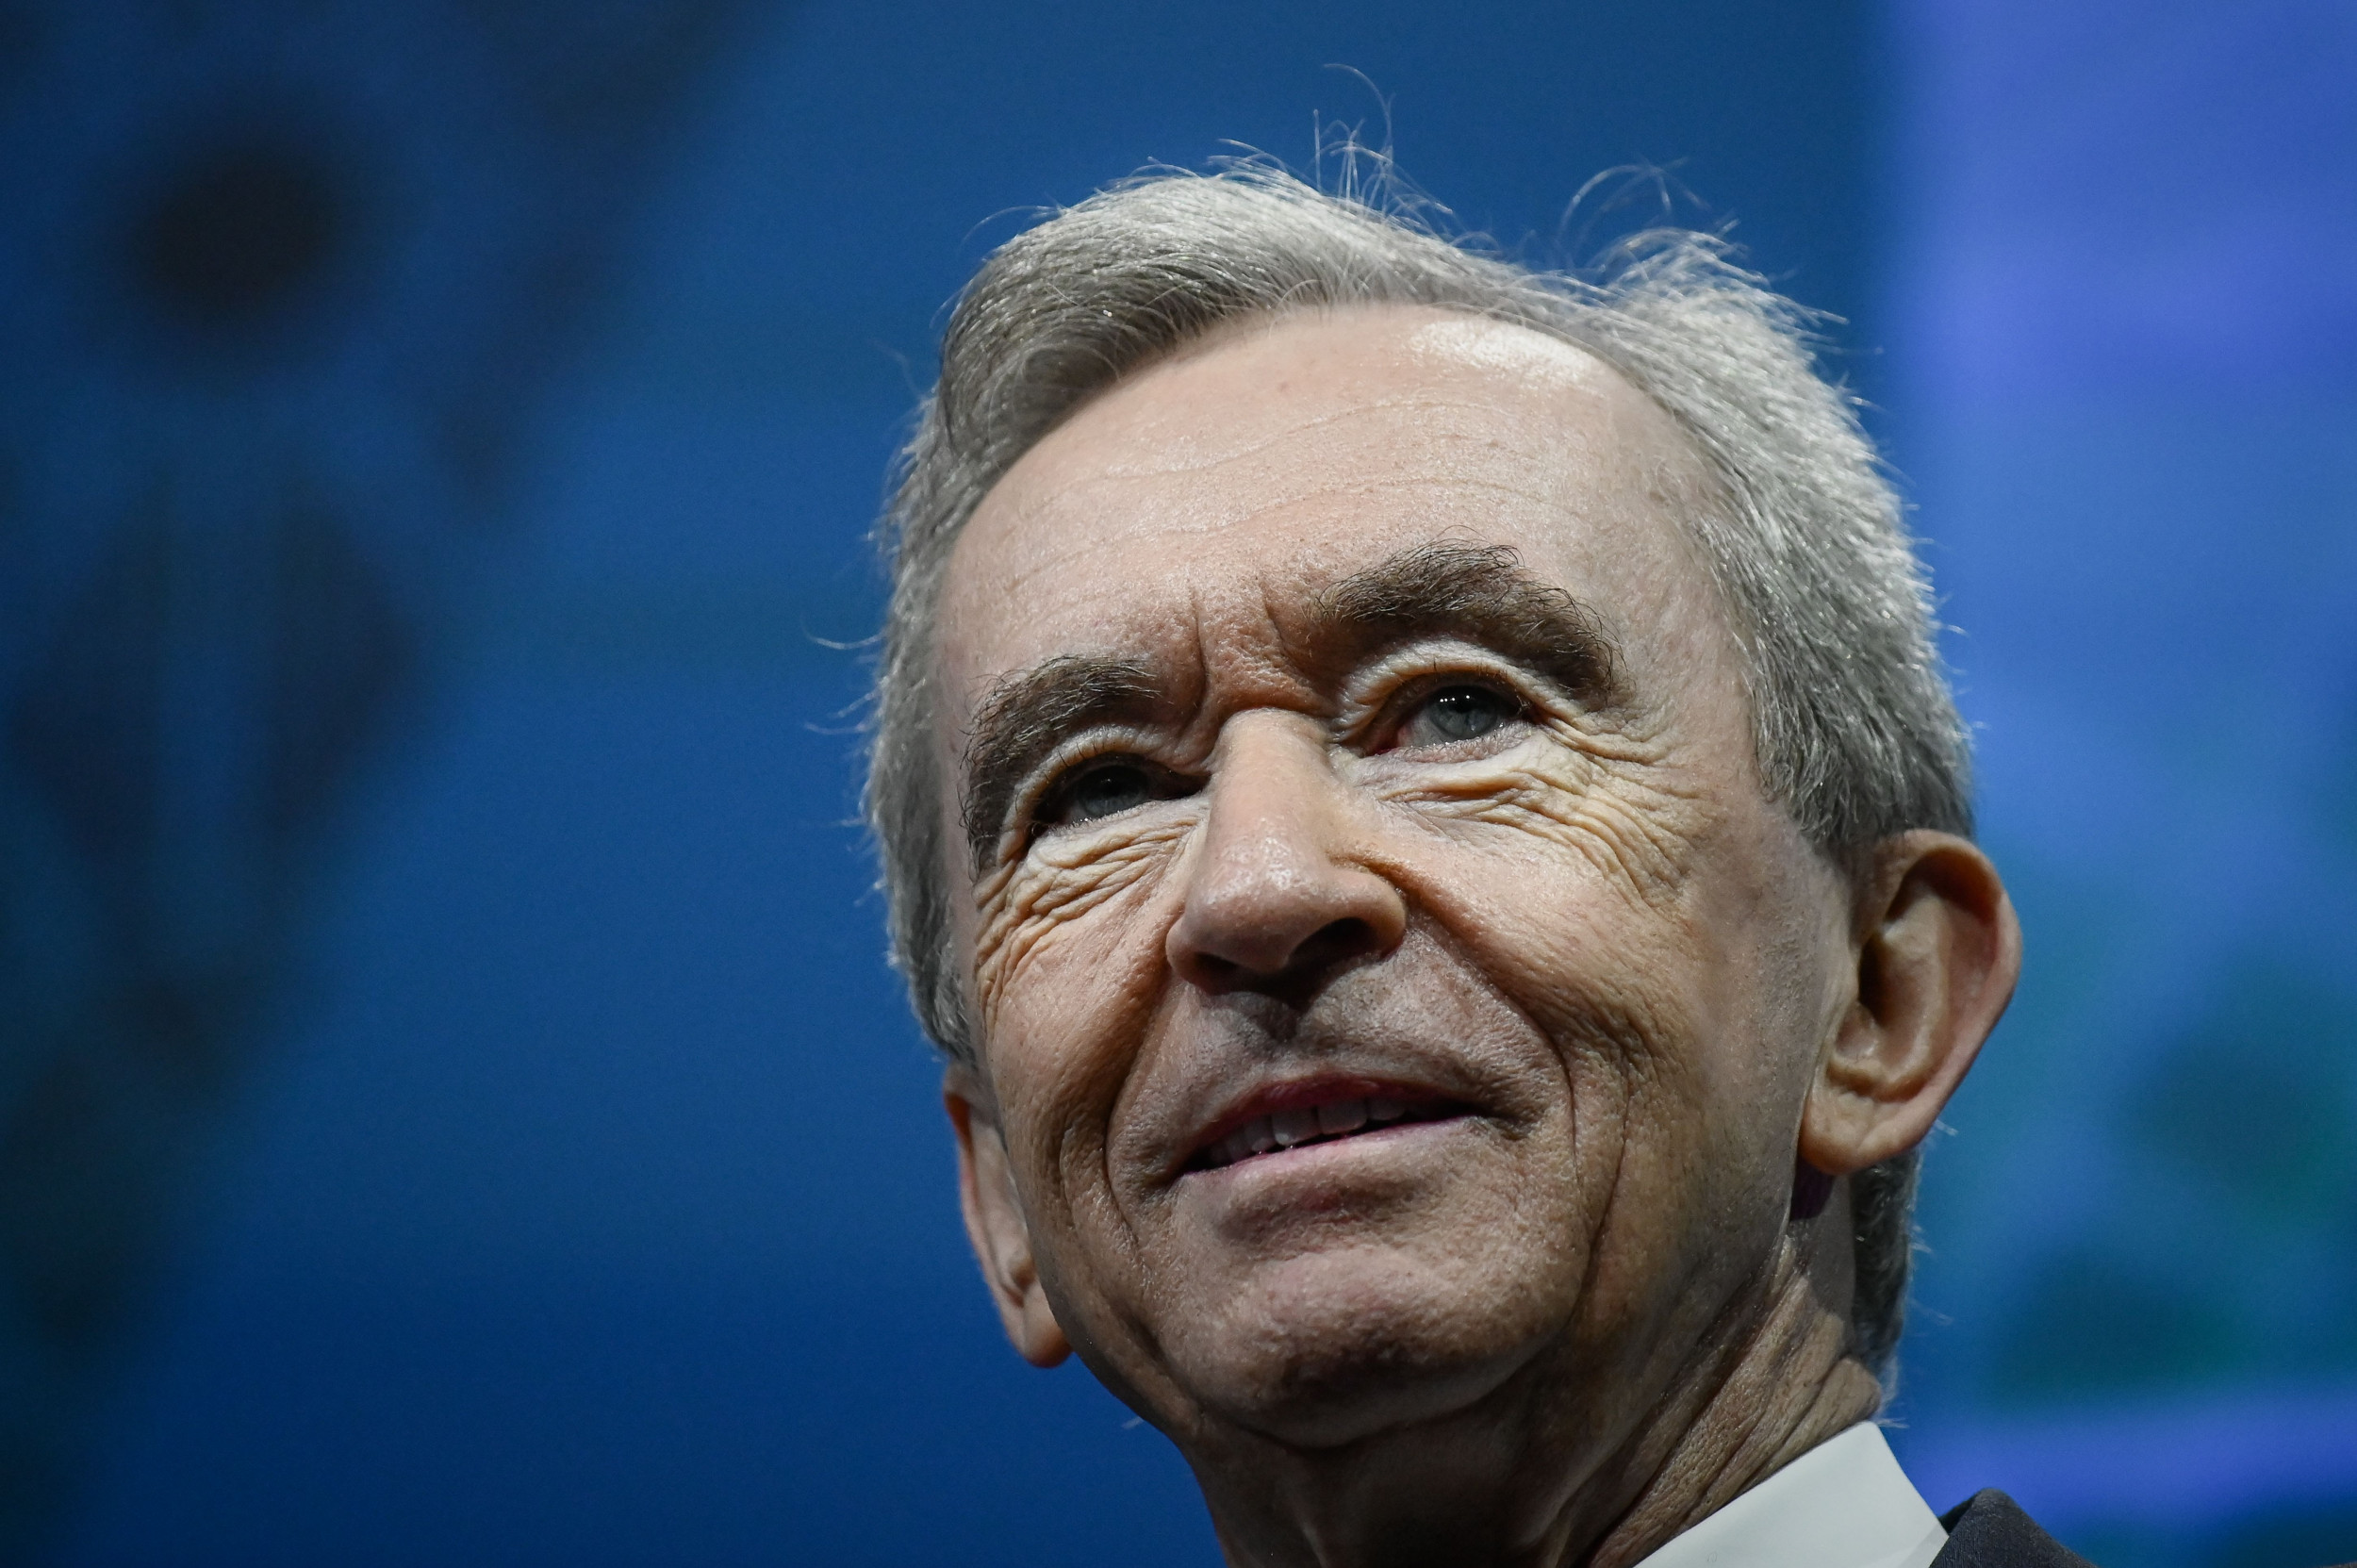 Bernard Arnault has become the richest person in the world